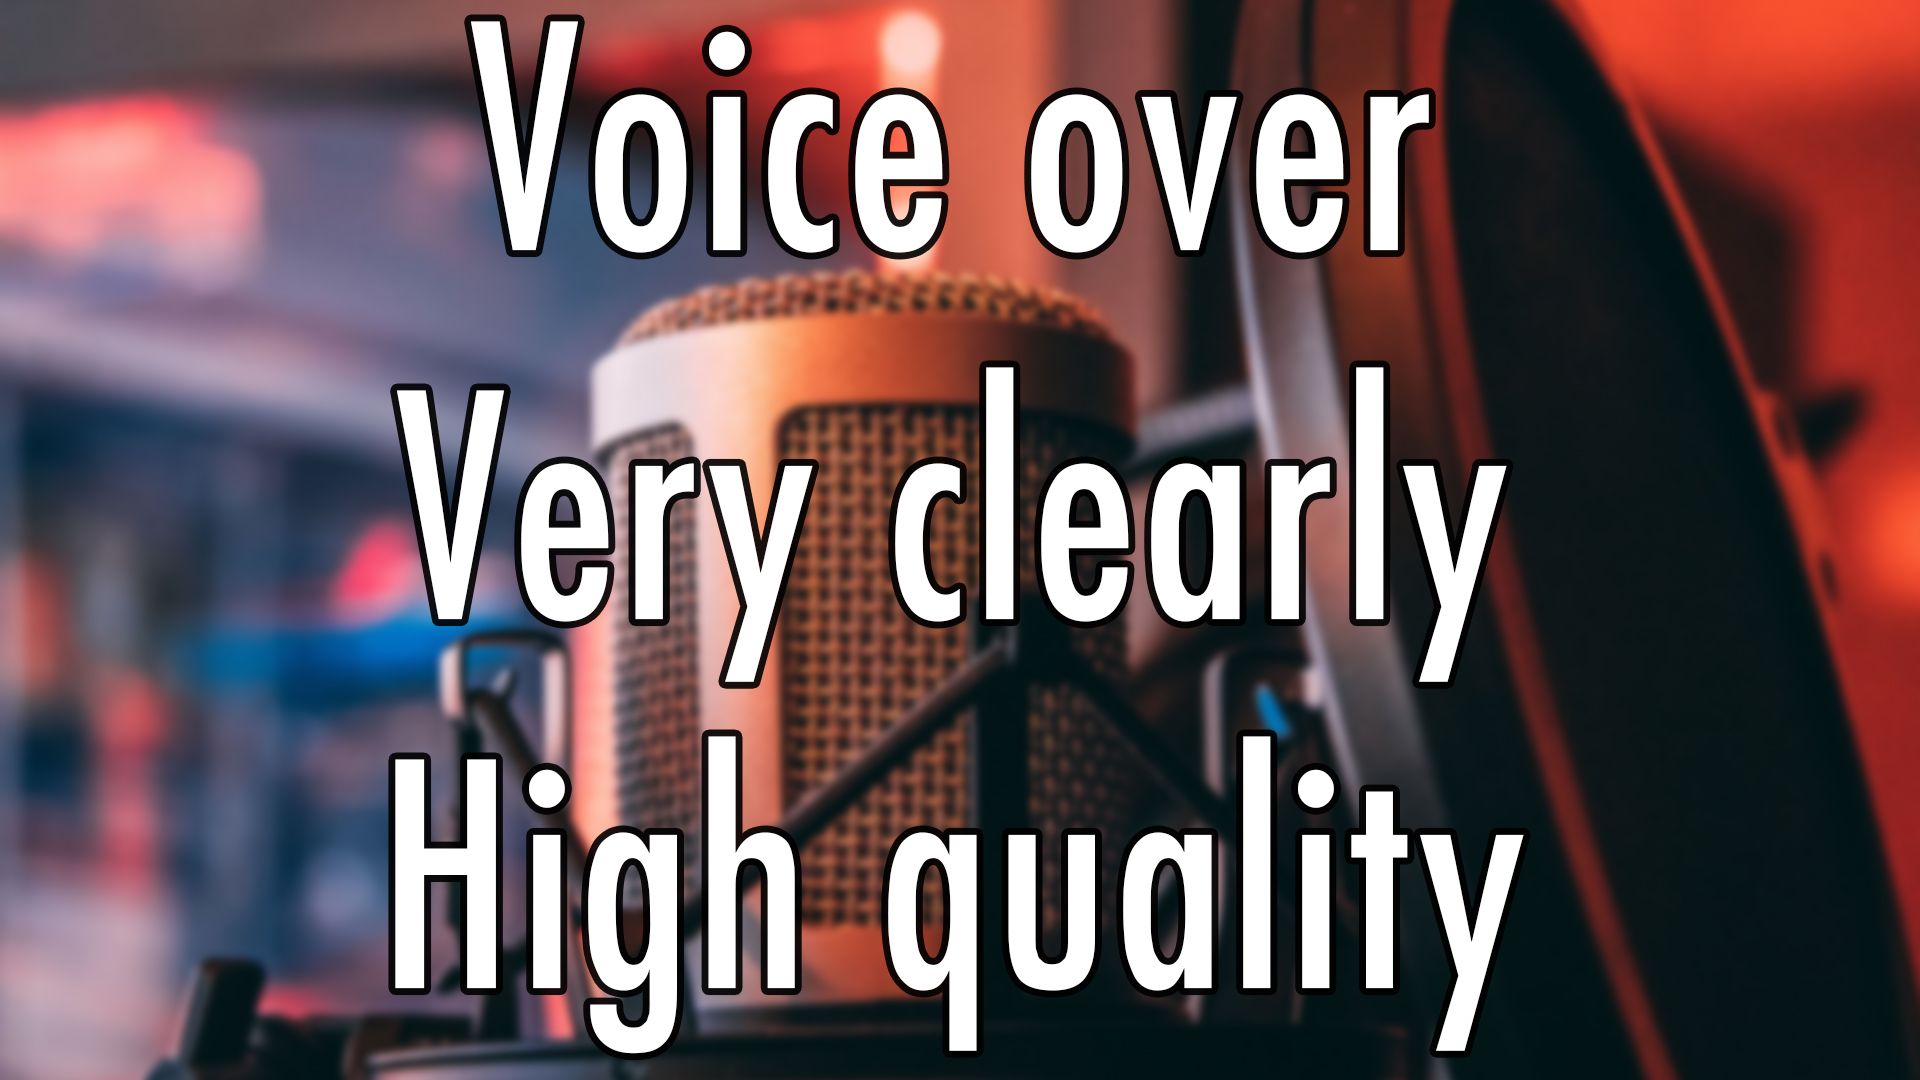 Voice over very clearly and high quality